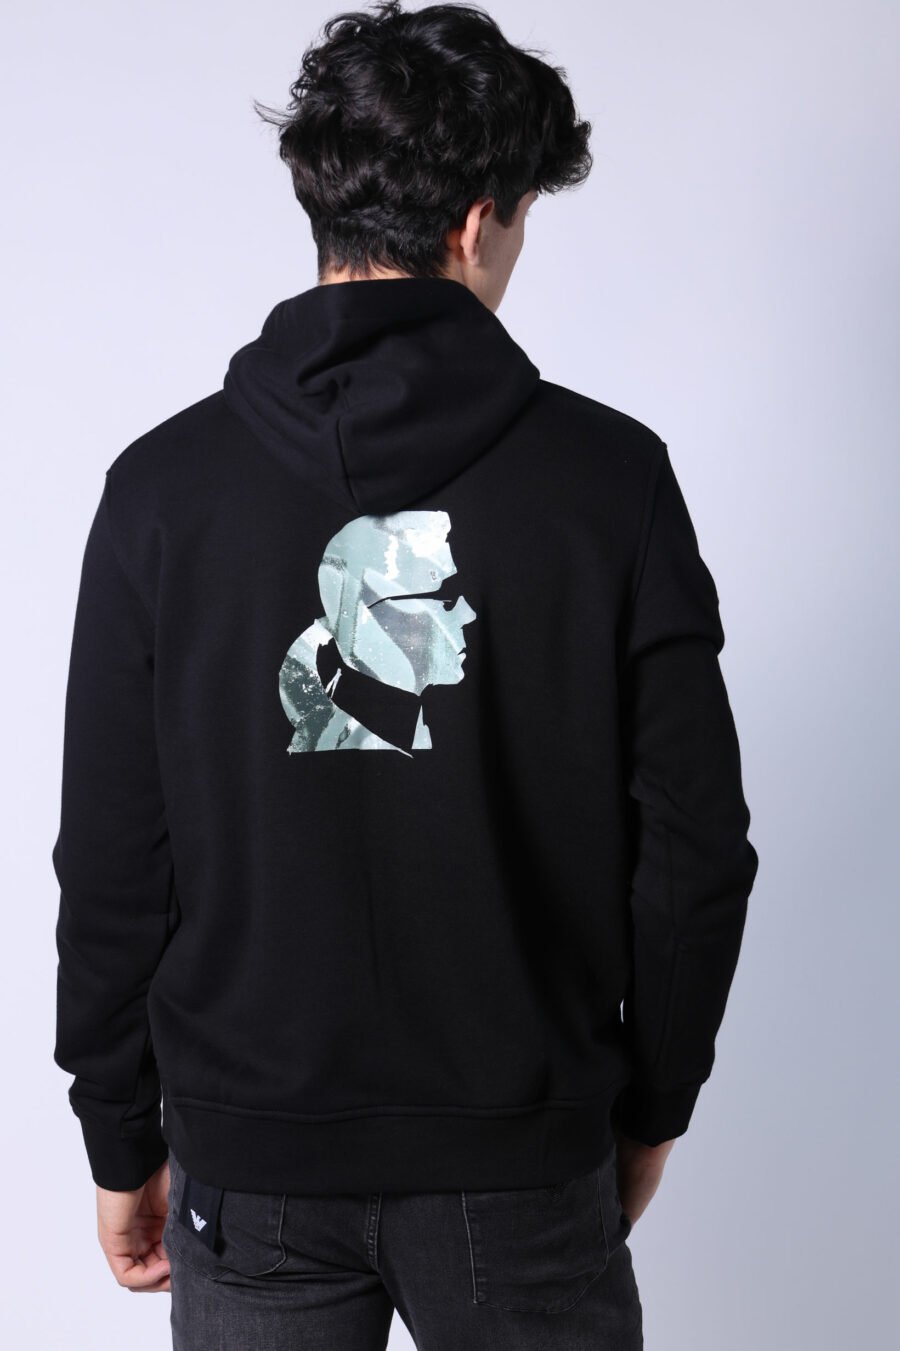 Black hooded sweatshirt with "rue st guillaume" logo - Untitled Catalog 05750